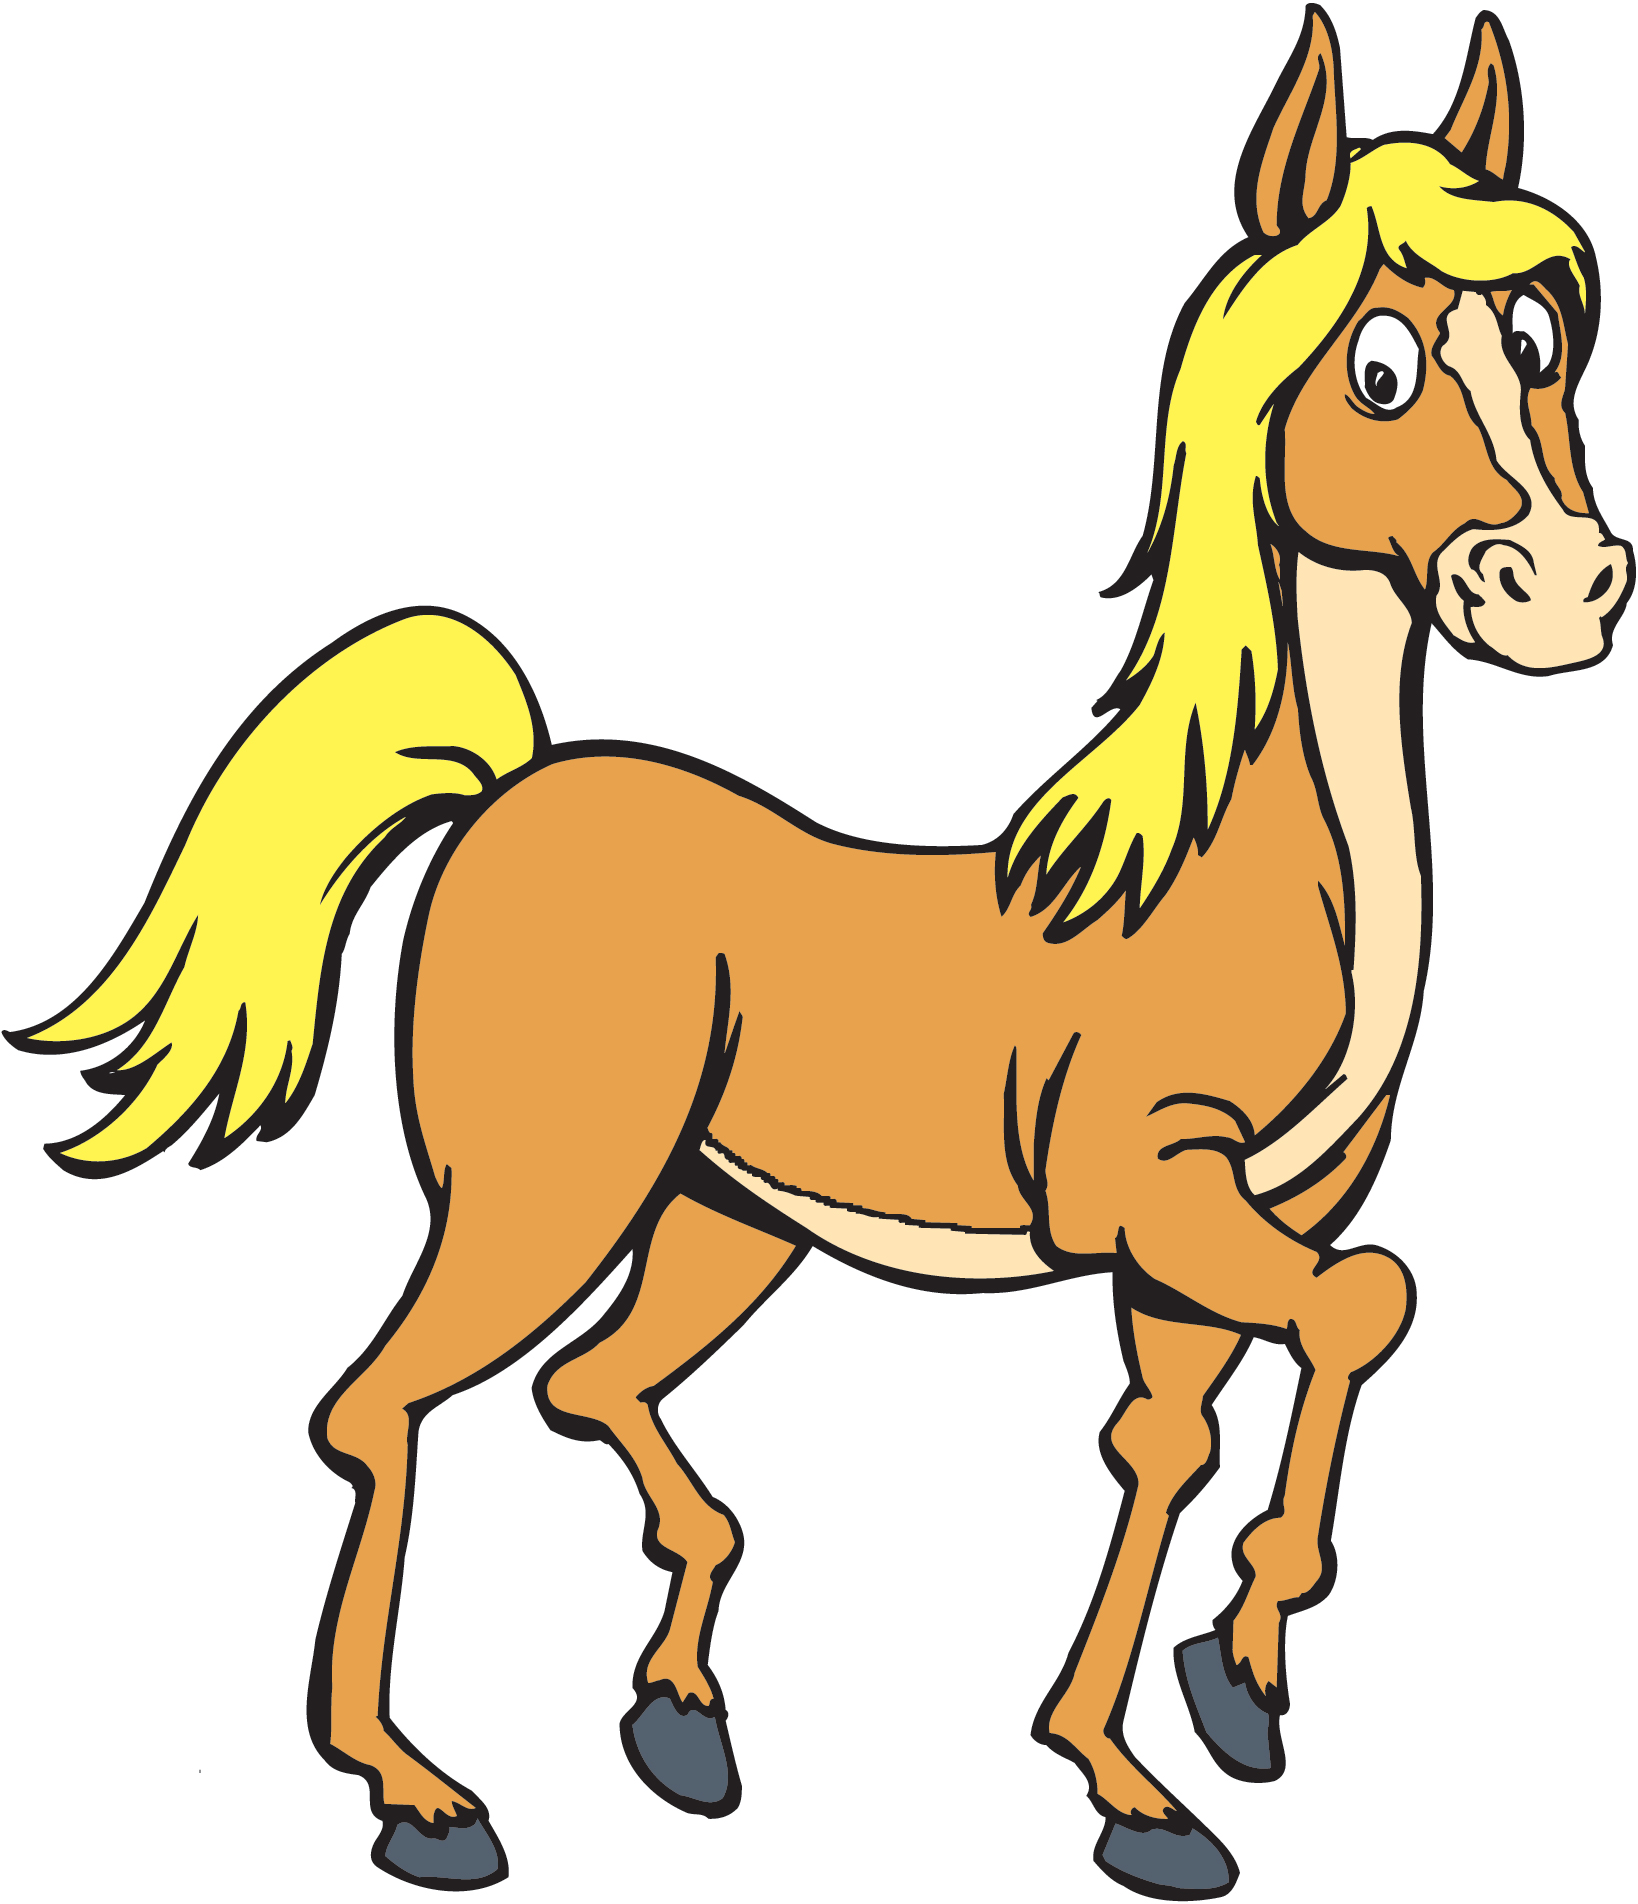 Horse image clipart